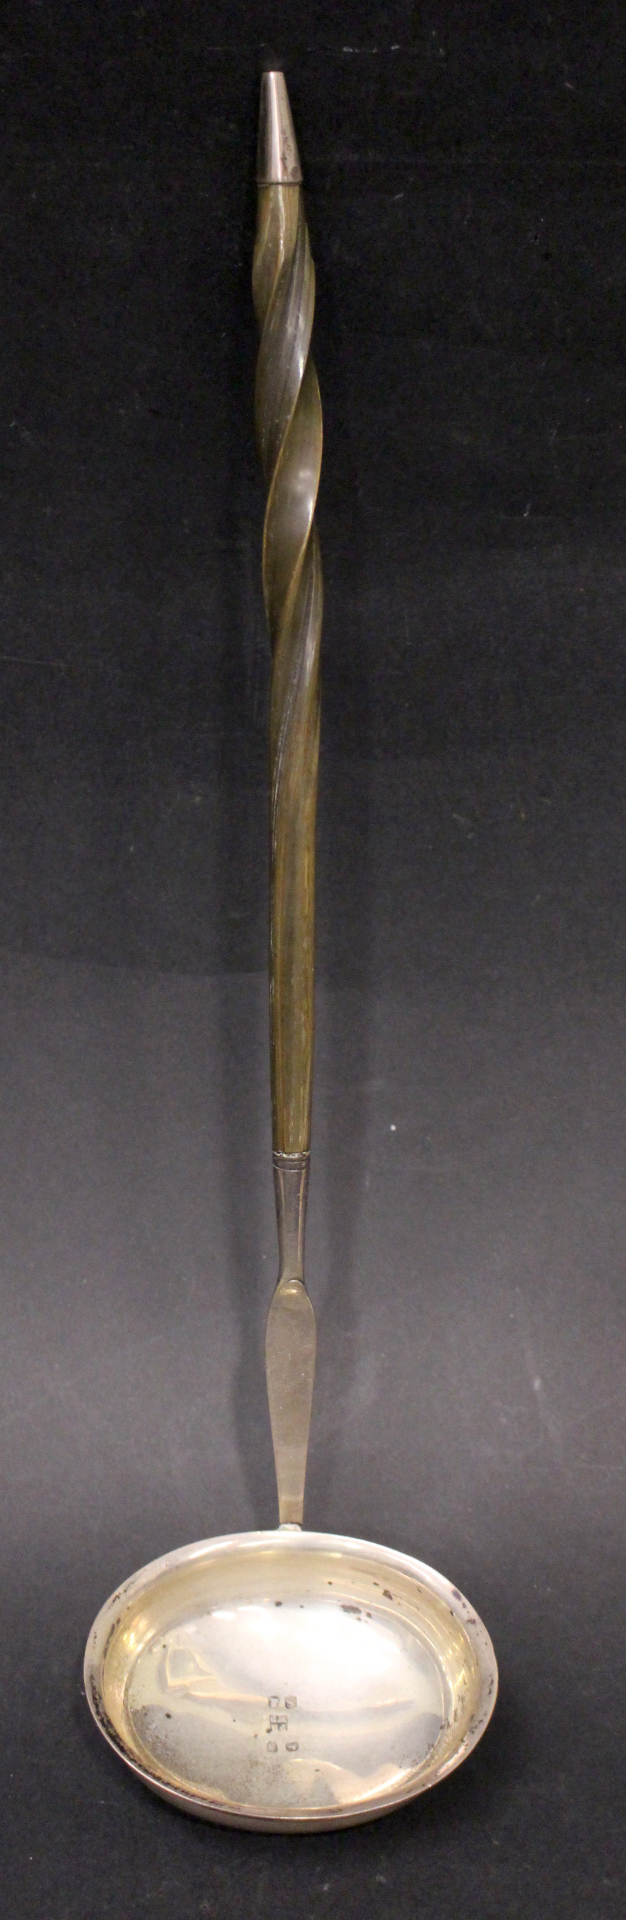 AN EARLY 19TH CENTURY ENGLISH SILVER LADLE, with twisted ‘Baleen’/bone handle, tipped with silver,